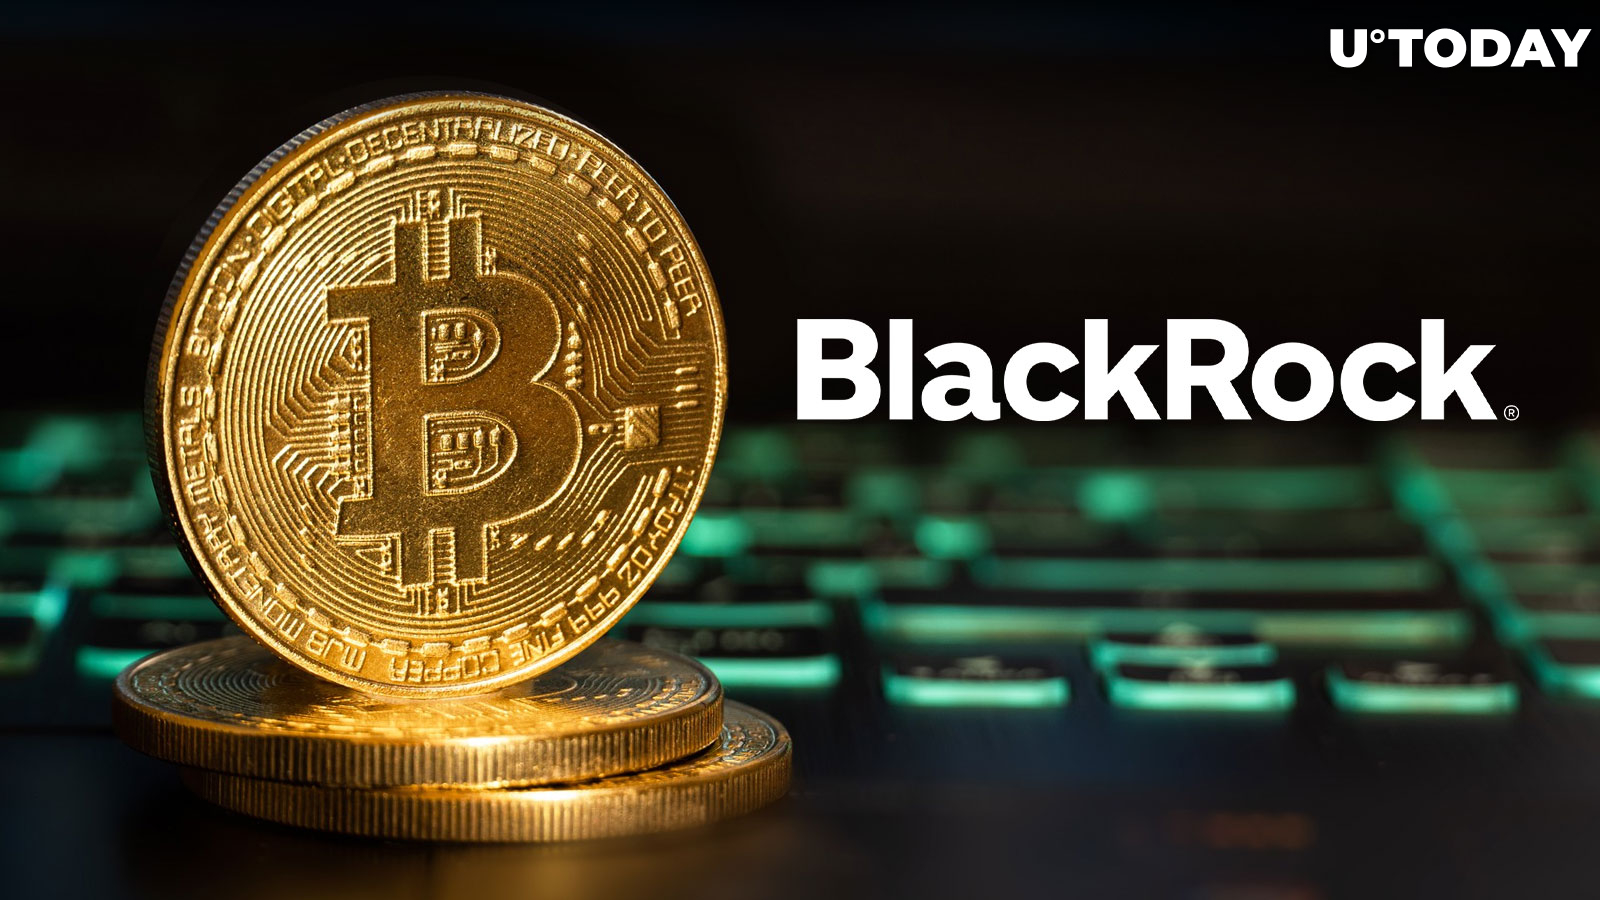 BlackRock Bitcoin Spot ETF Poised for Rapid Launch, Analyst Sparks Speculation